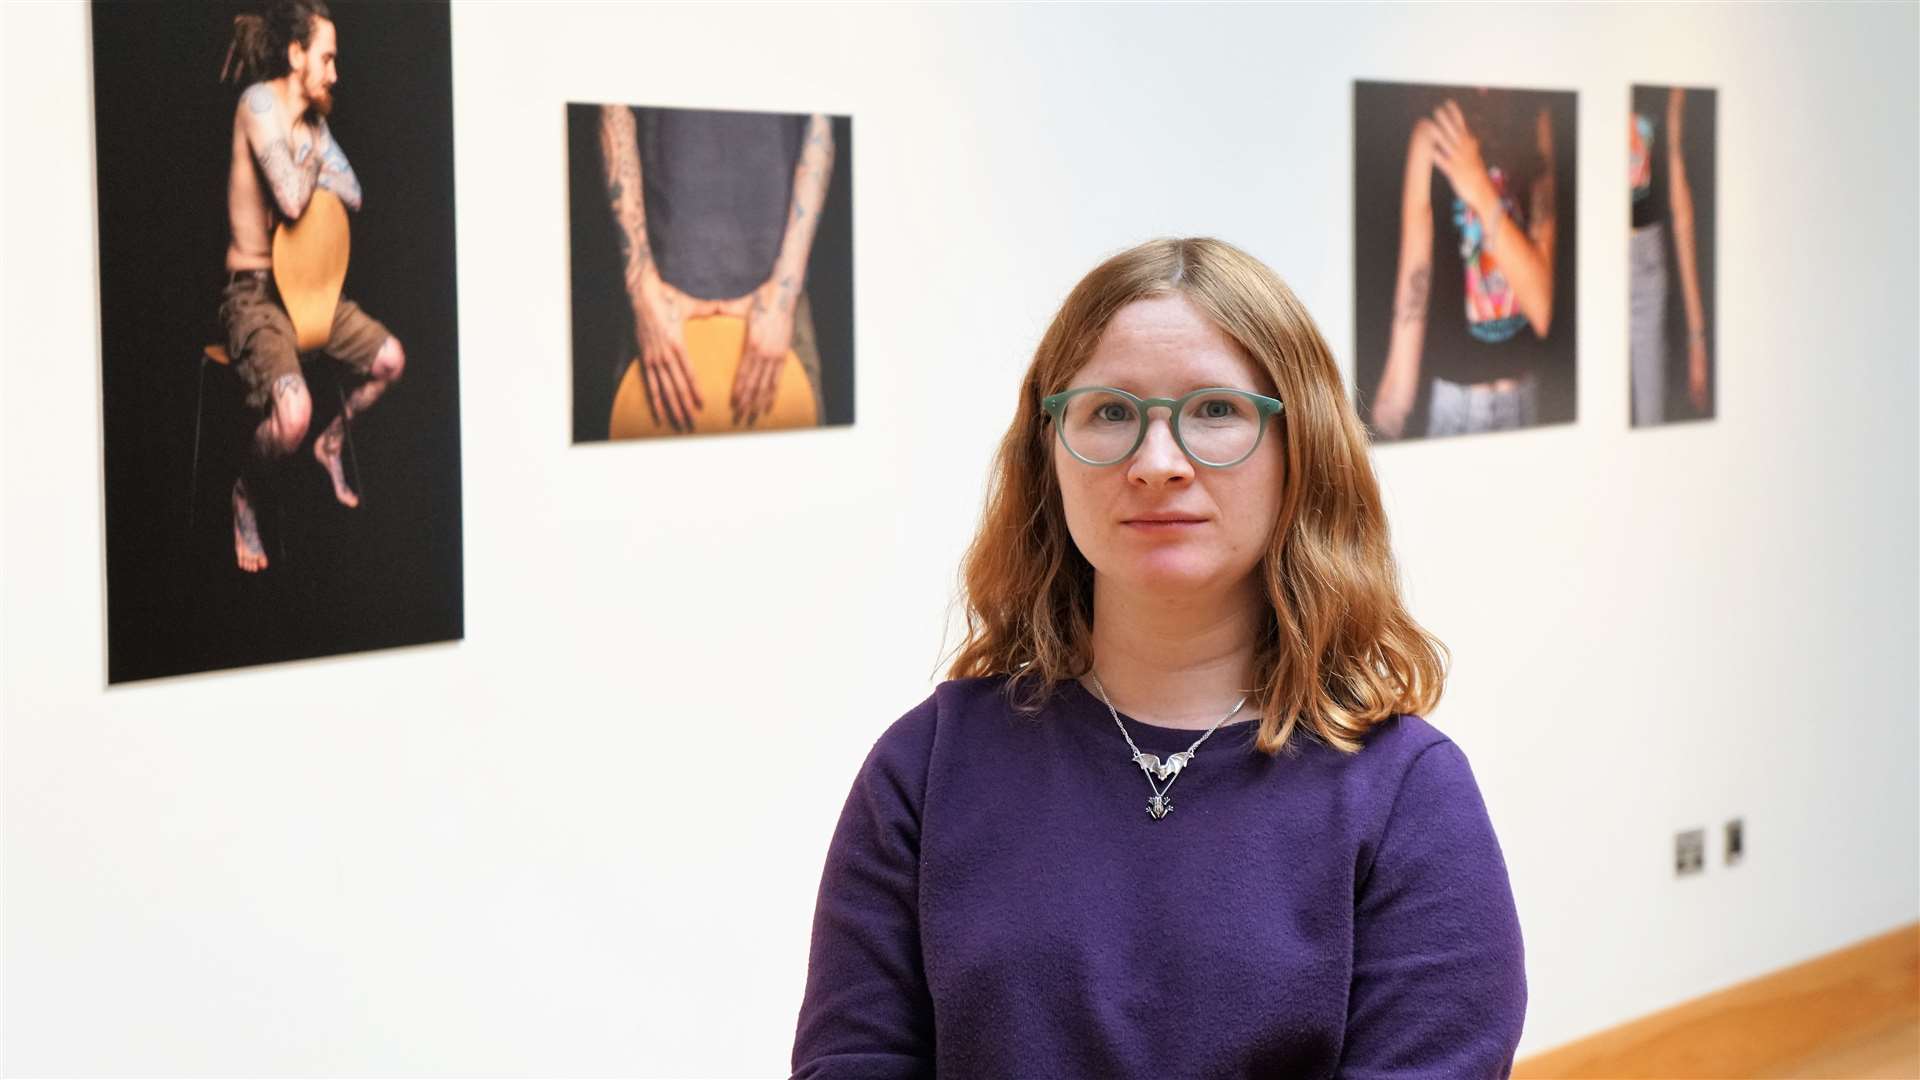 Aimee Lockwood is the freelance exhibition coordinator behind the Painted People exhibition. Picture: DGS